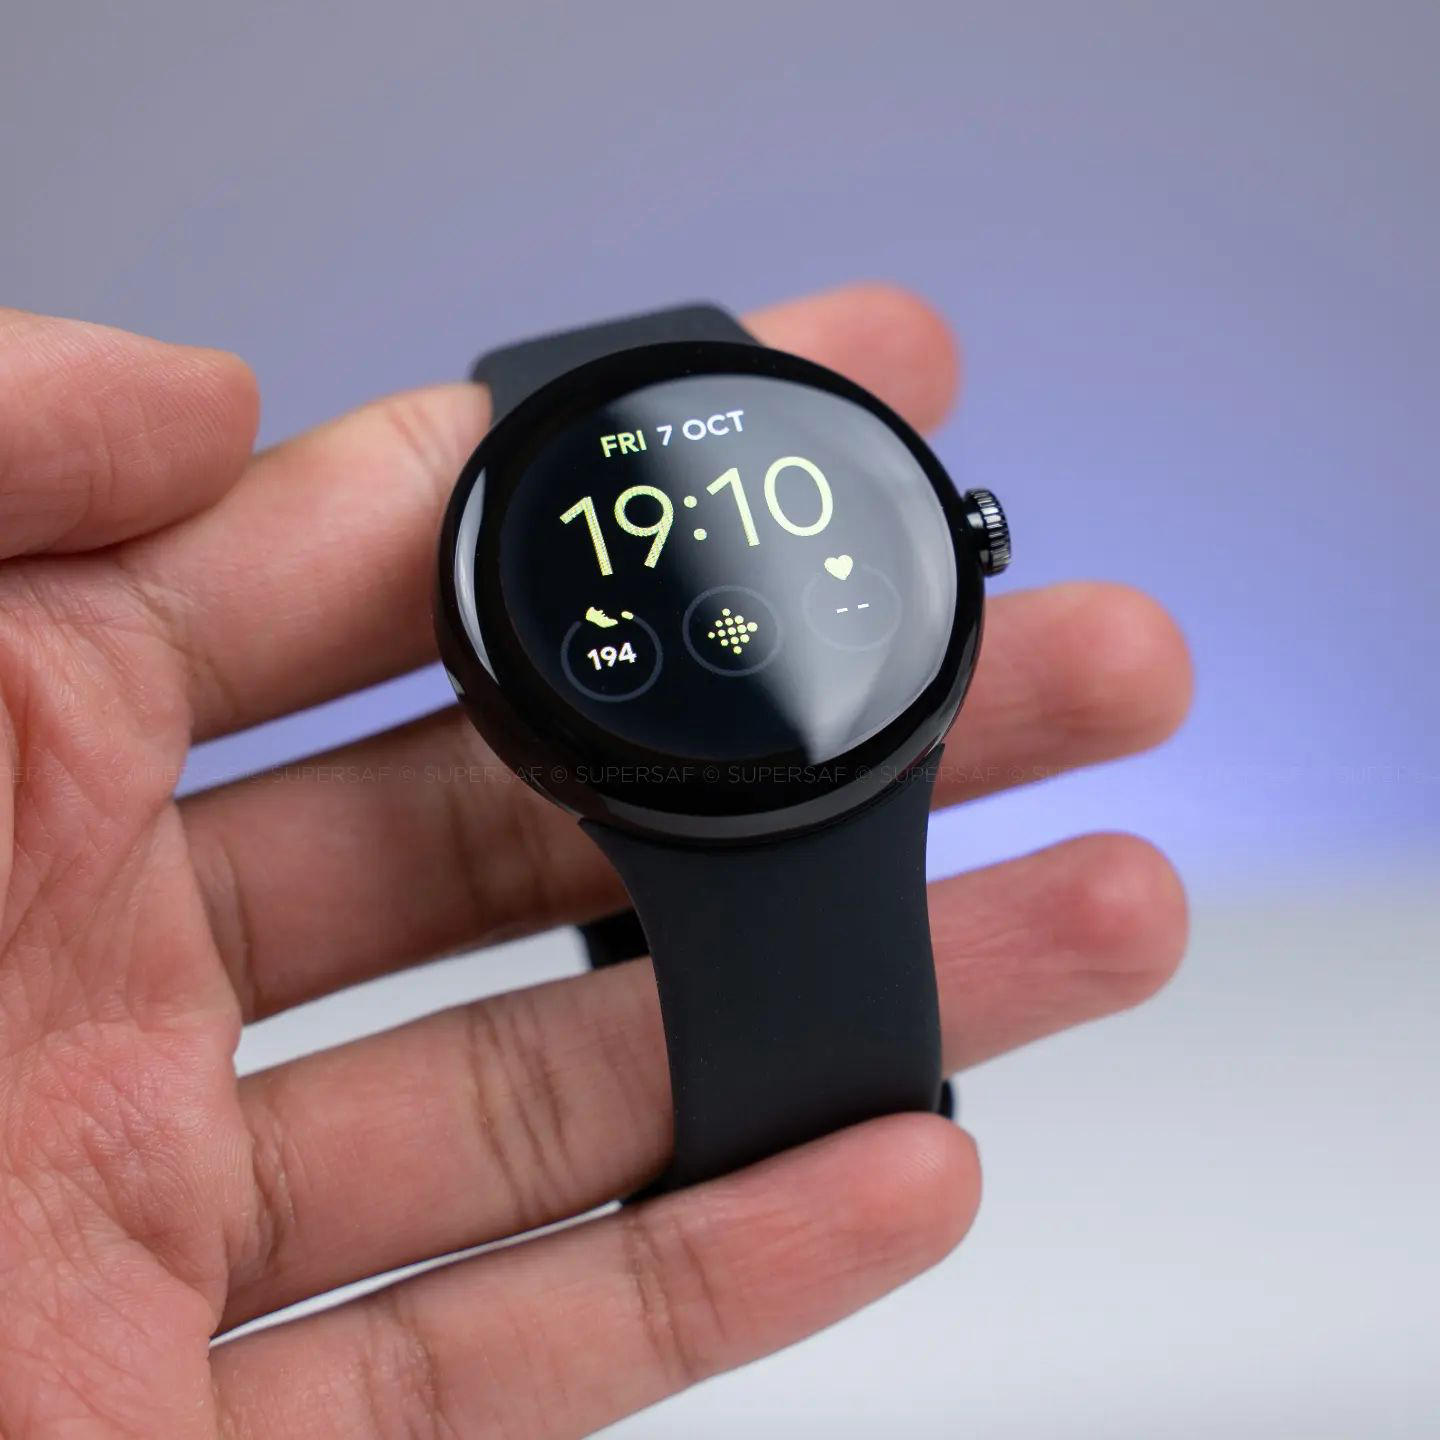 image  1 SuperSaf - This is one good looking smartwatch